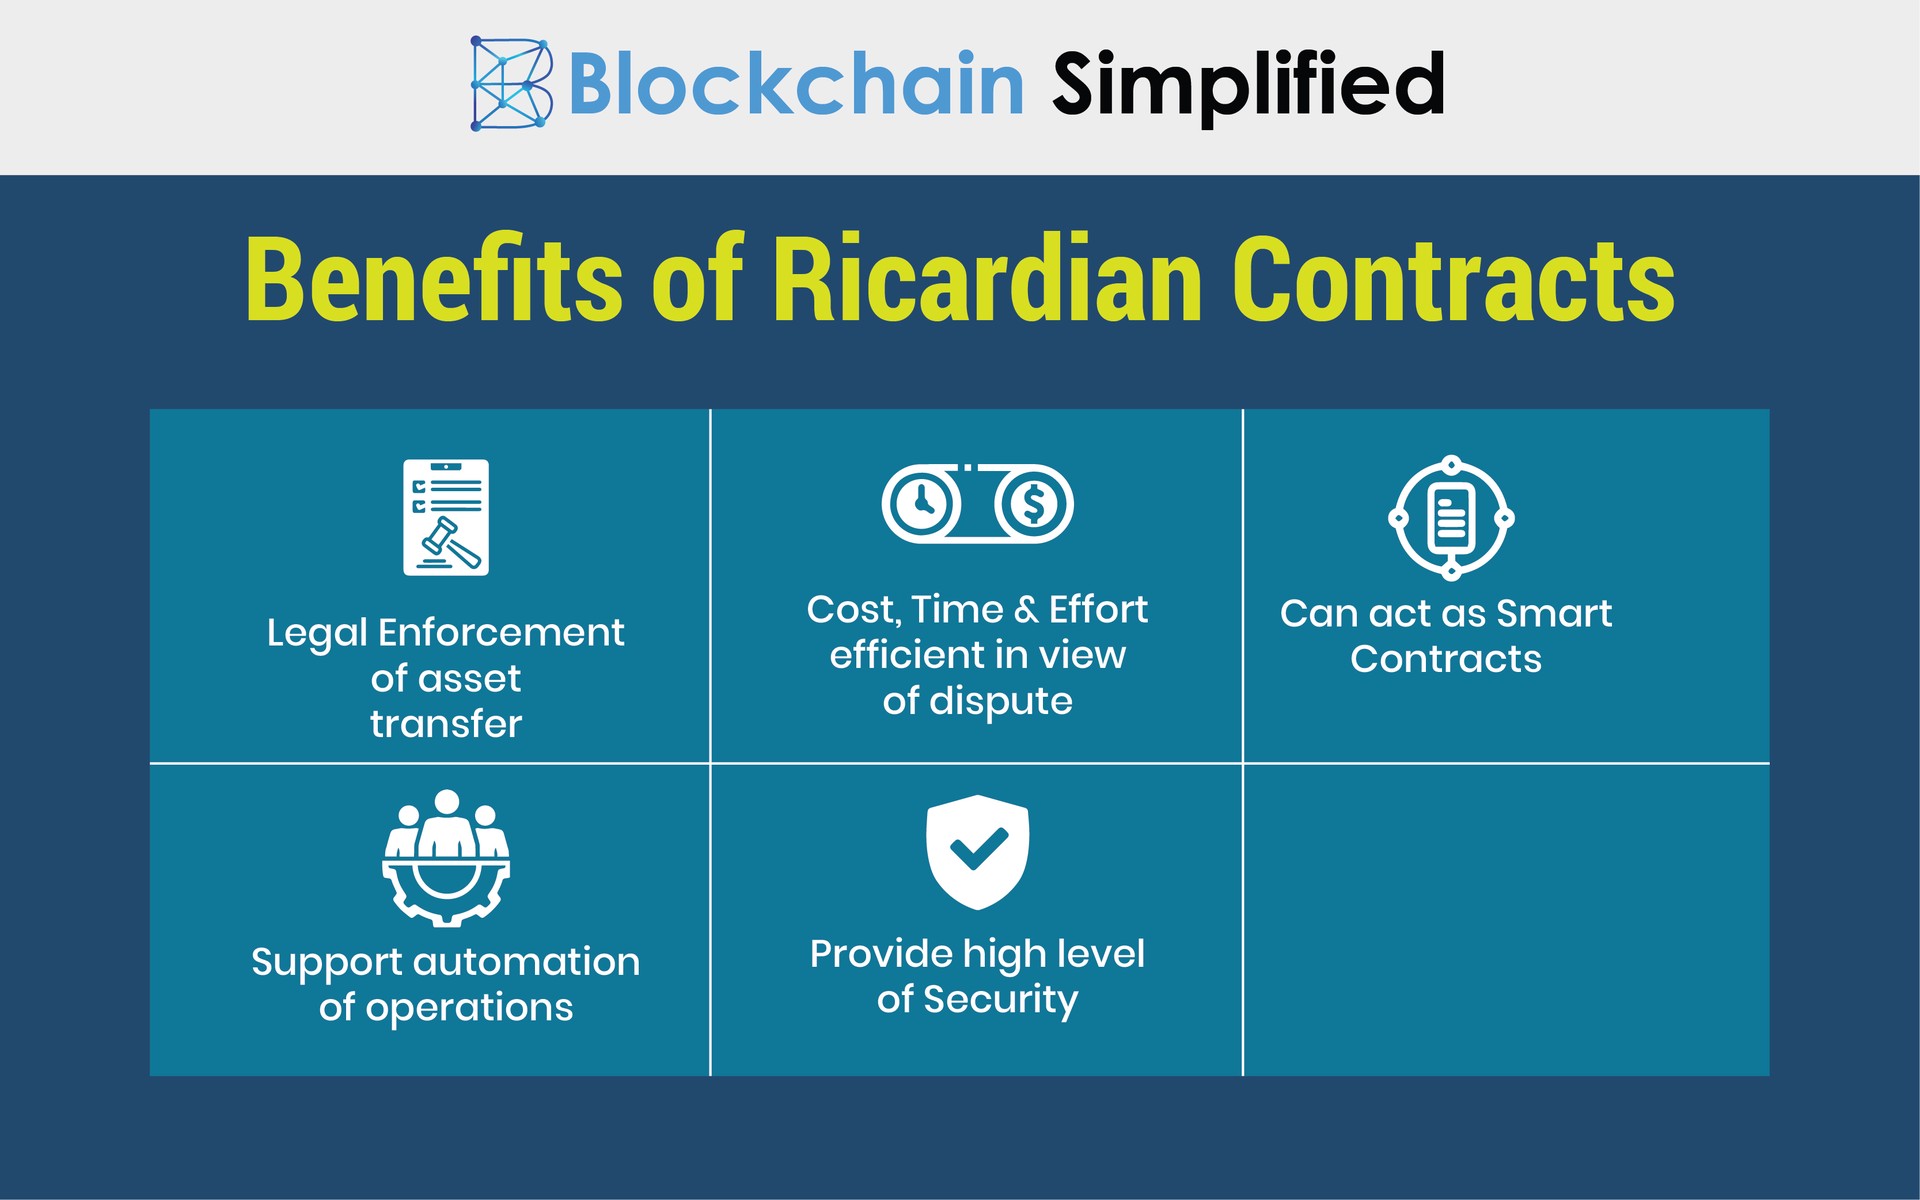 Smart Contracts on Blockchain vs Ricardian Contracts benefits